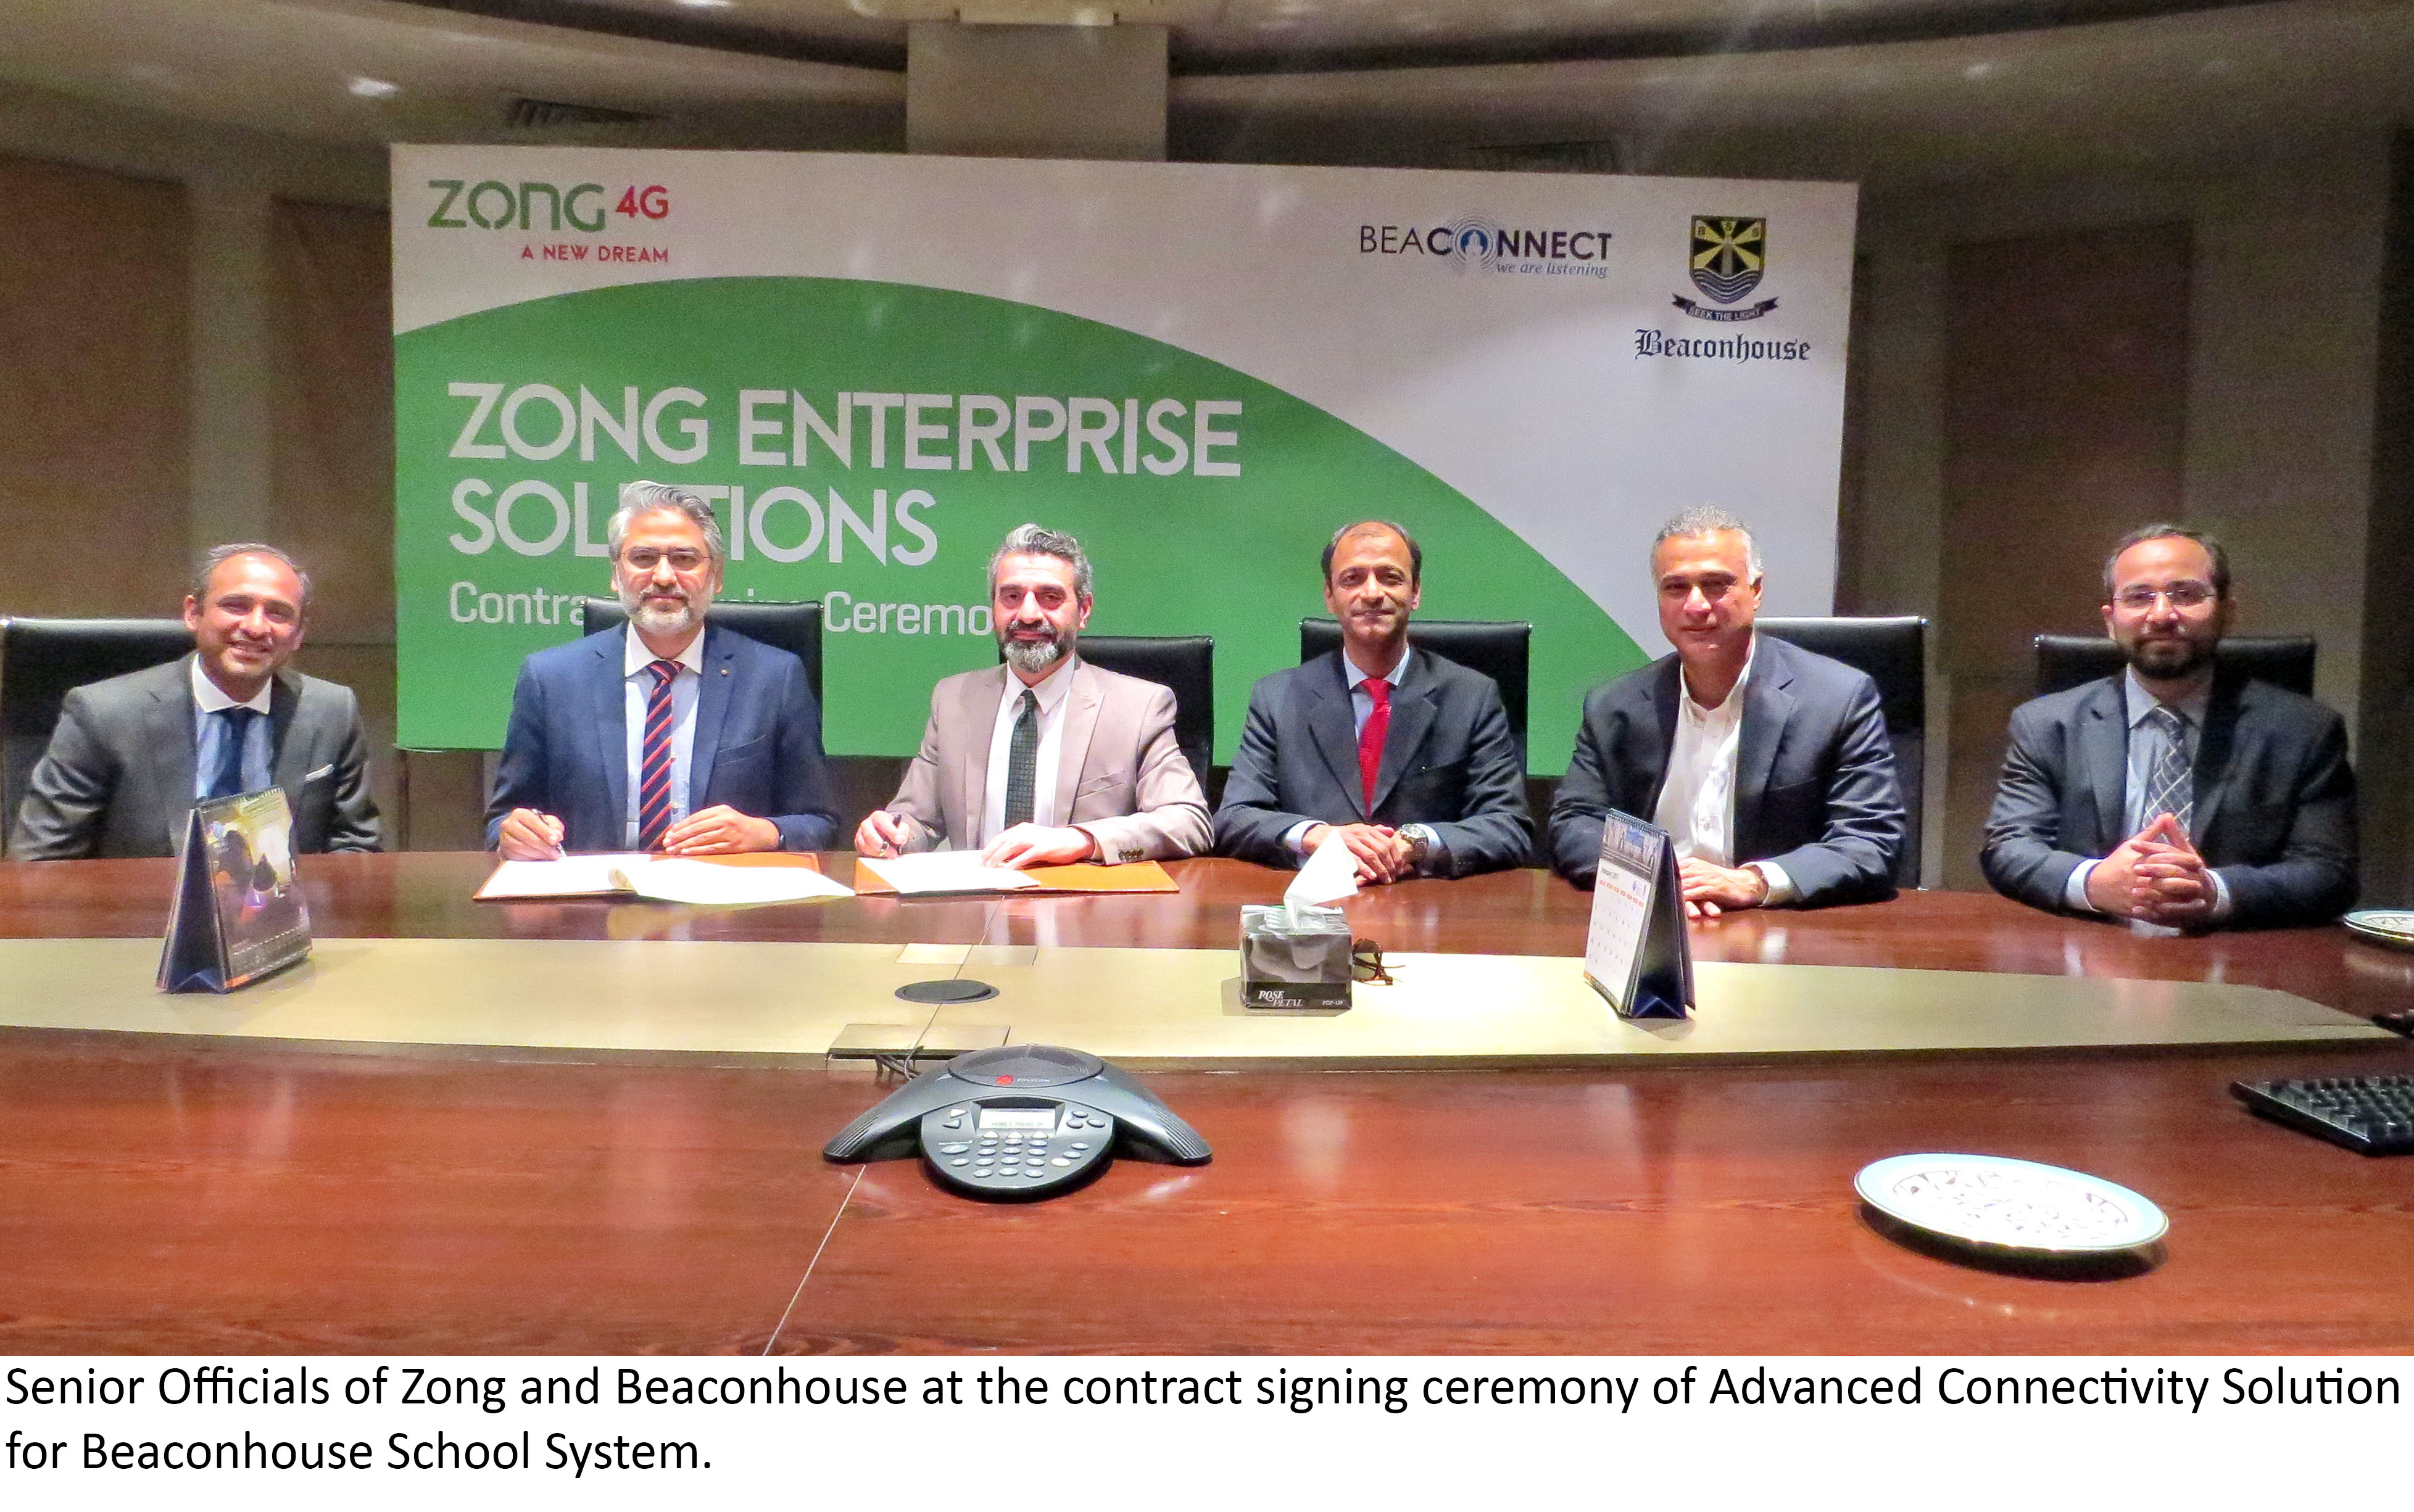 Zong equips Beaconhouse School System with Advanced Connectivity Solution